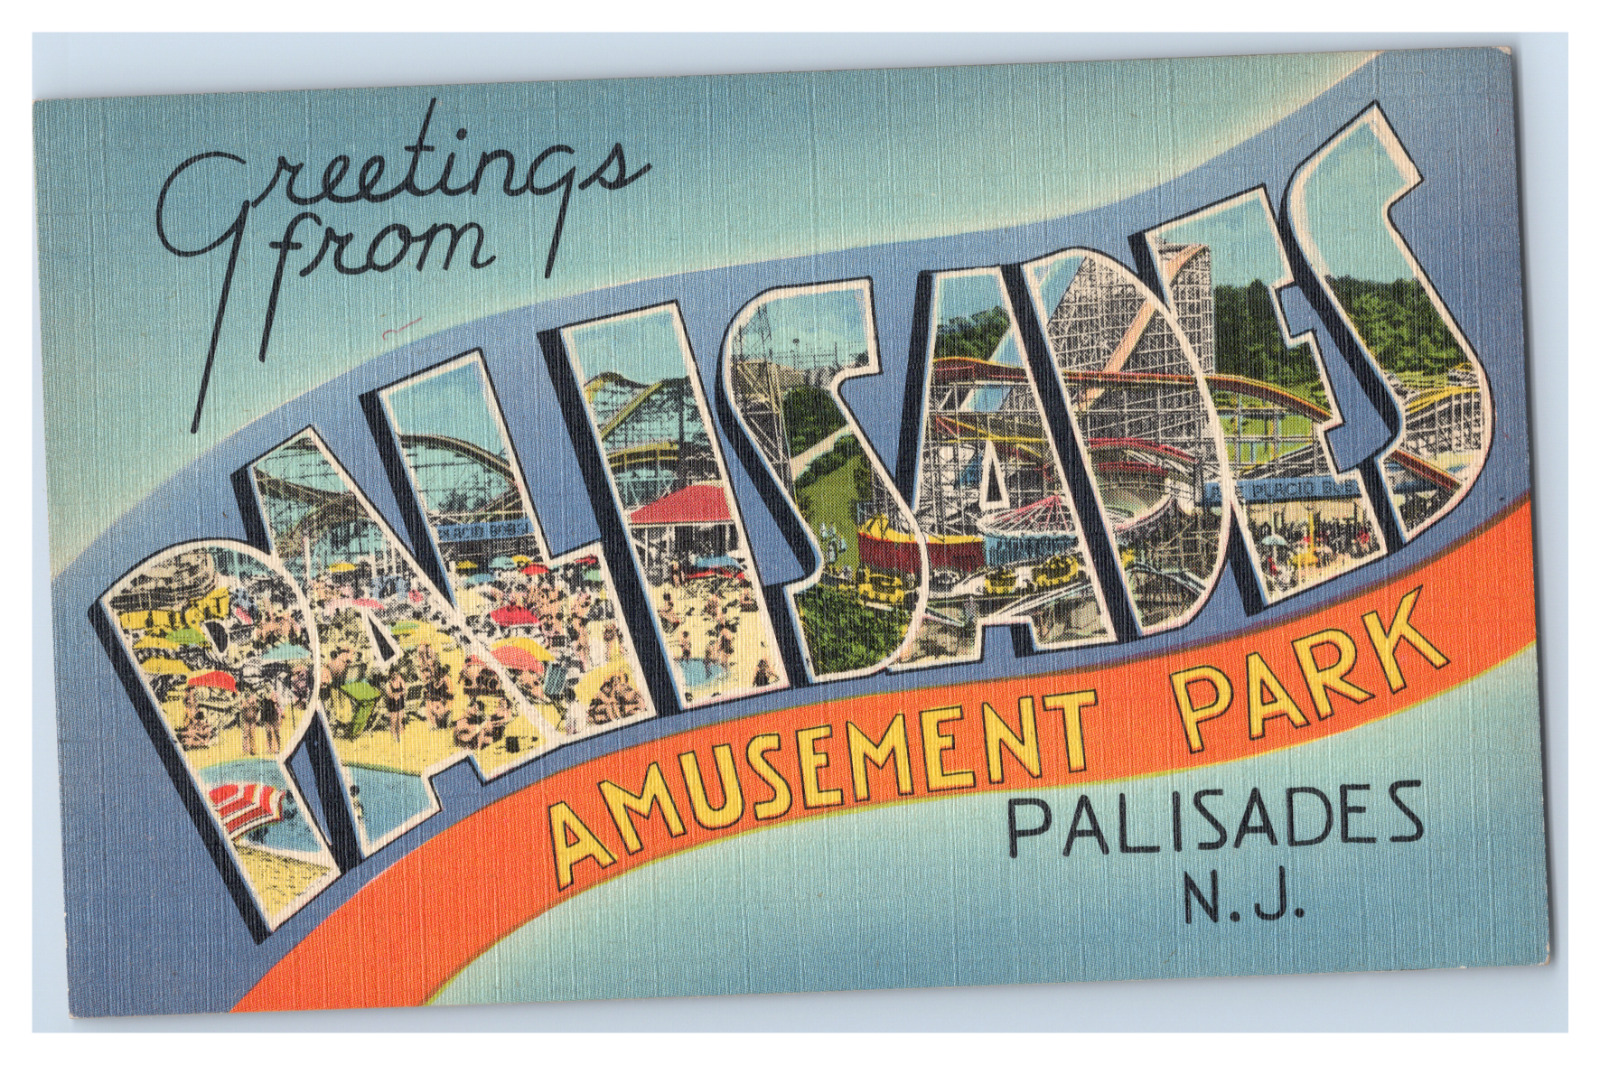 Linen Postcard Greetings from the Palisades Amusement Park Large Block Letters